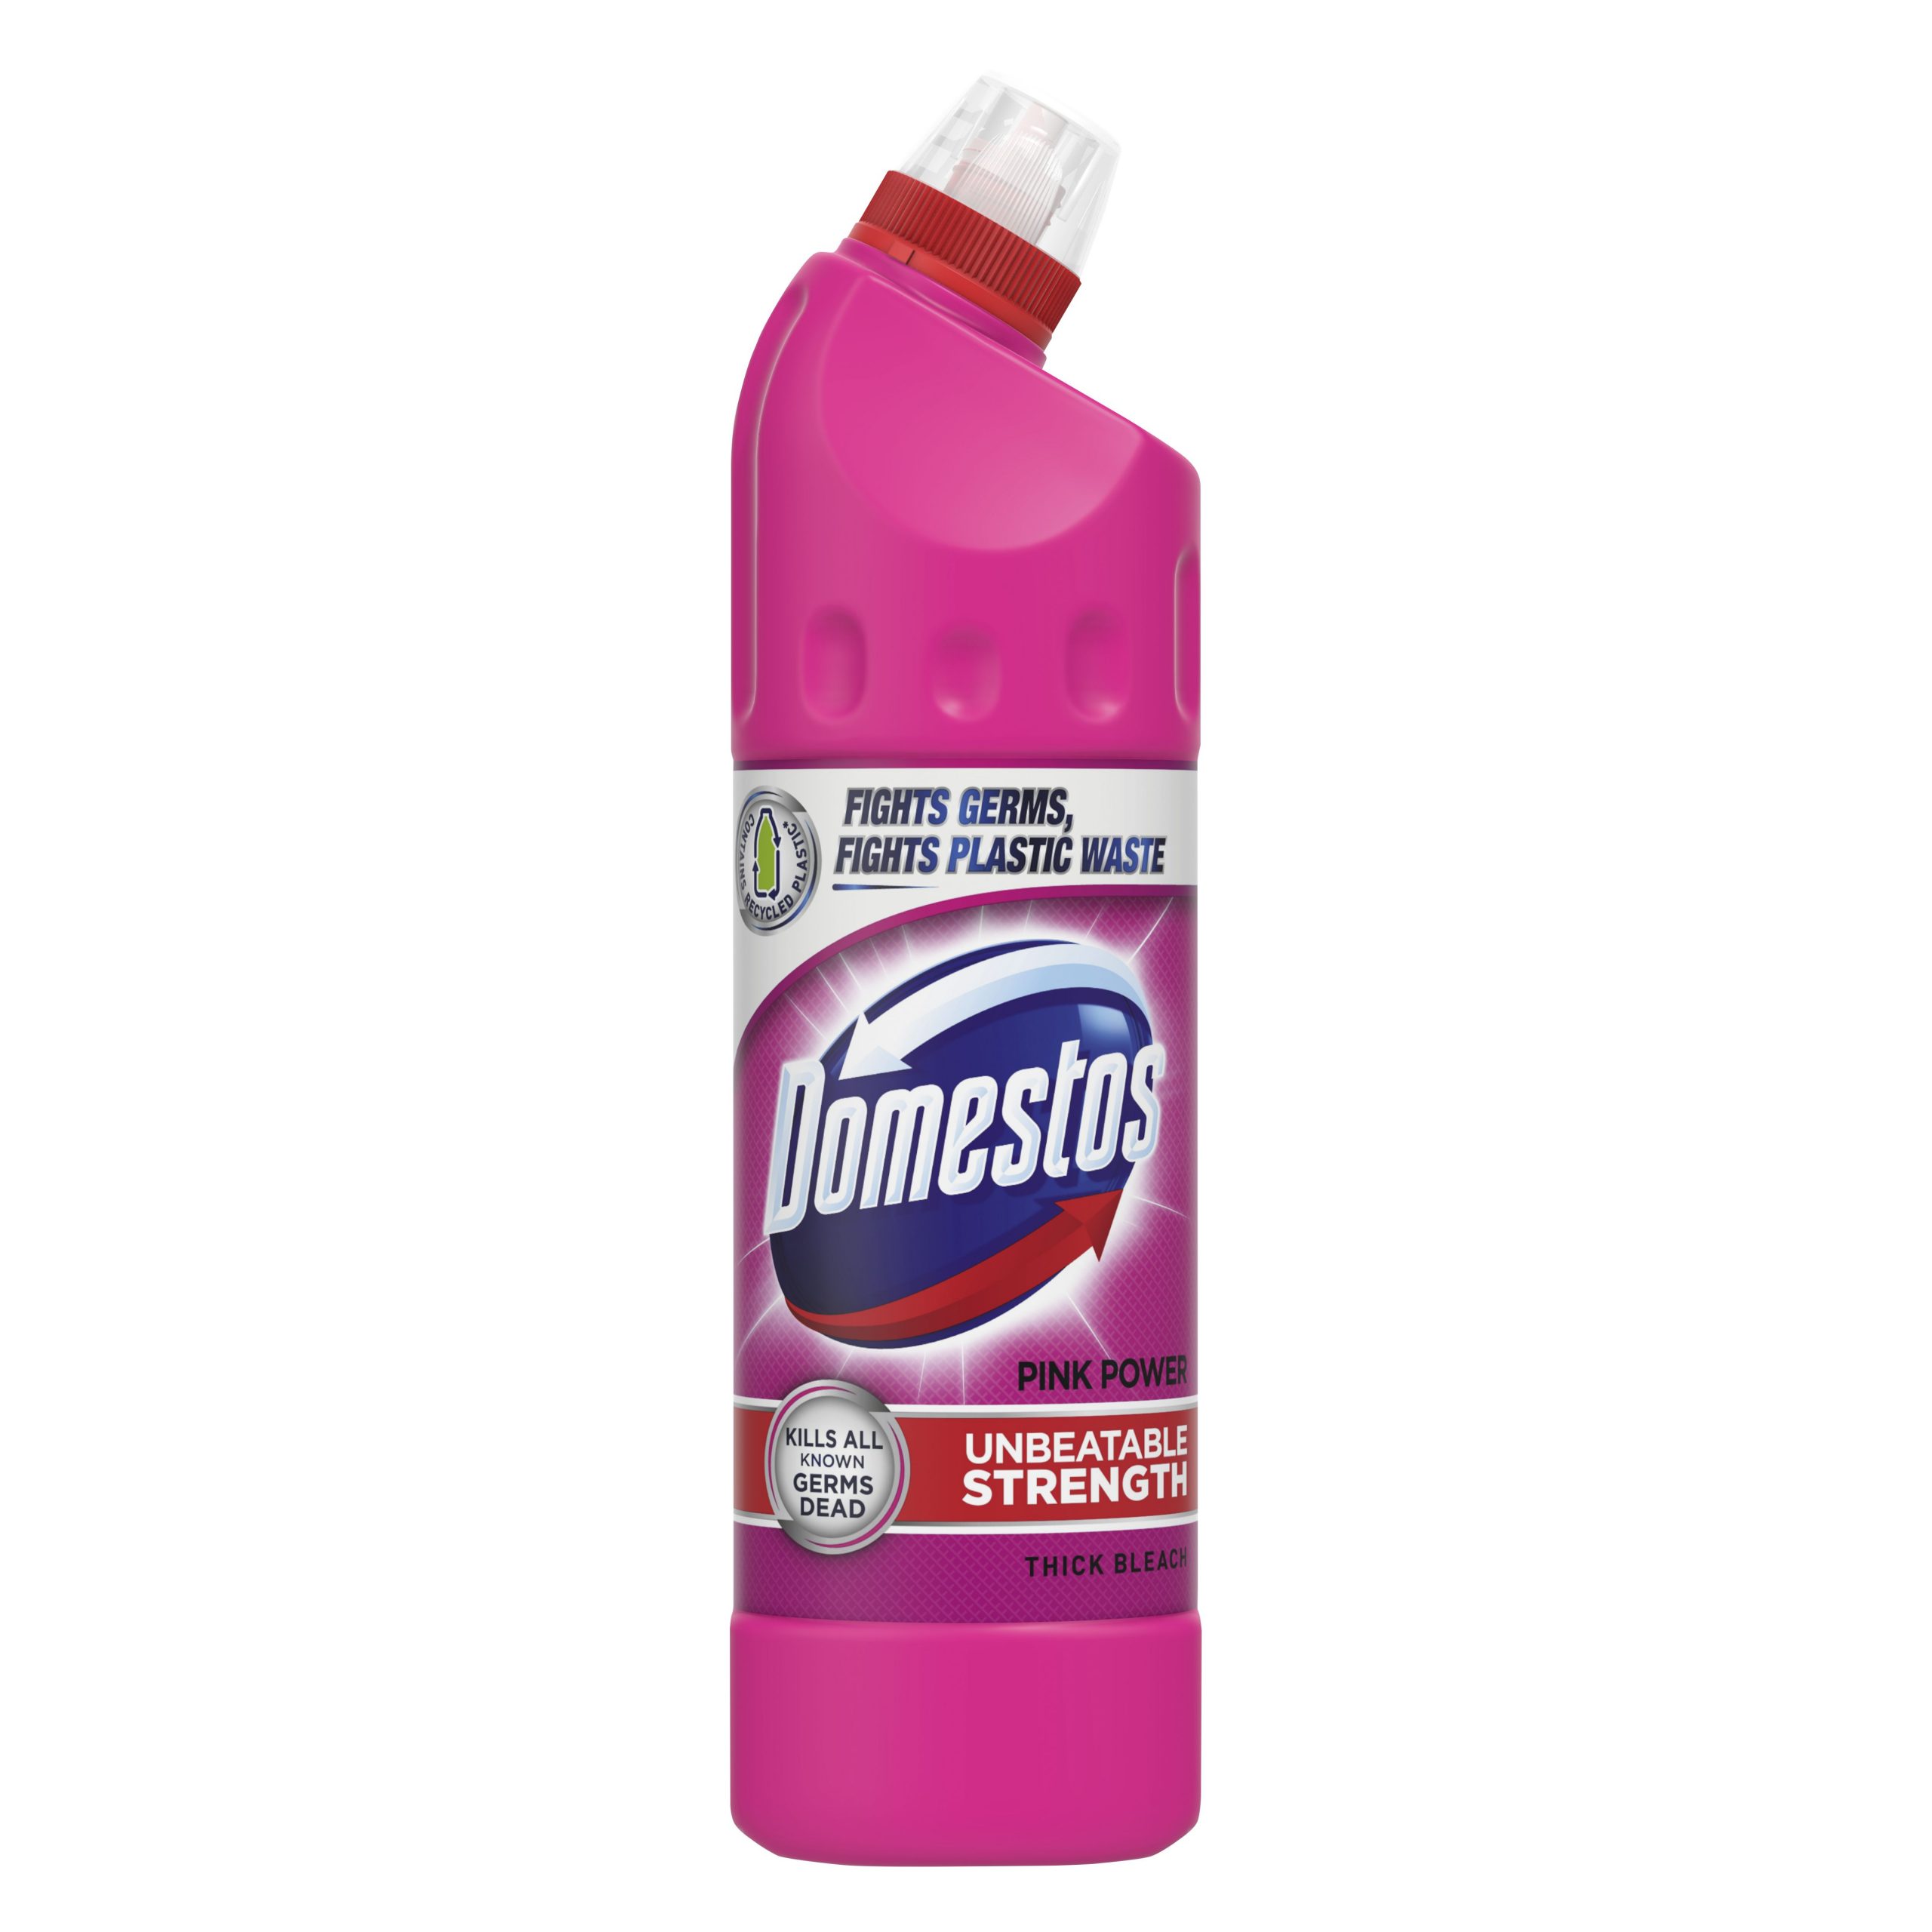 Domestos launches new bottles made with recycled plastic